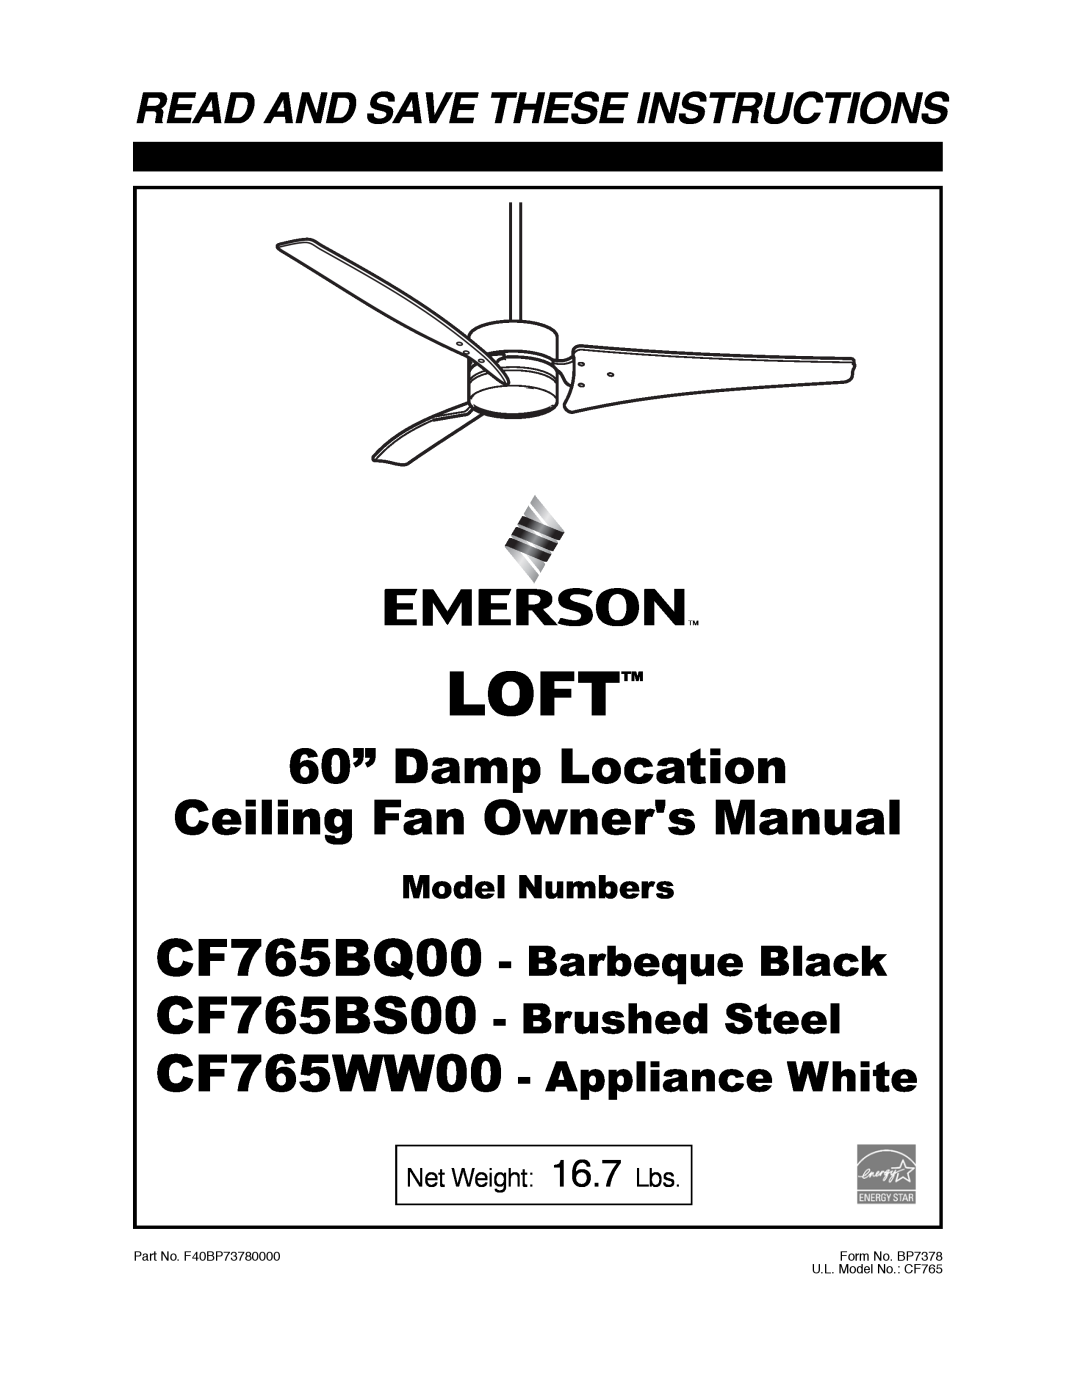 Emerson CF765WW00 owner manual Loft, Read And Save These Instructions, CF765BQ00 - Barbeque Black, Model Numbers 